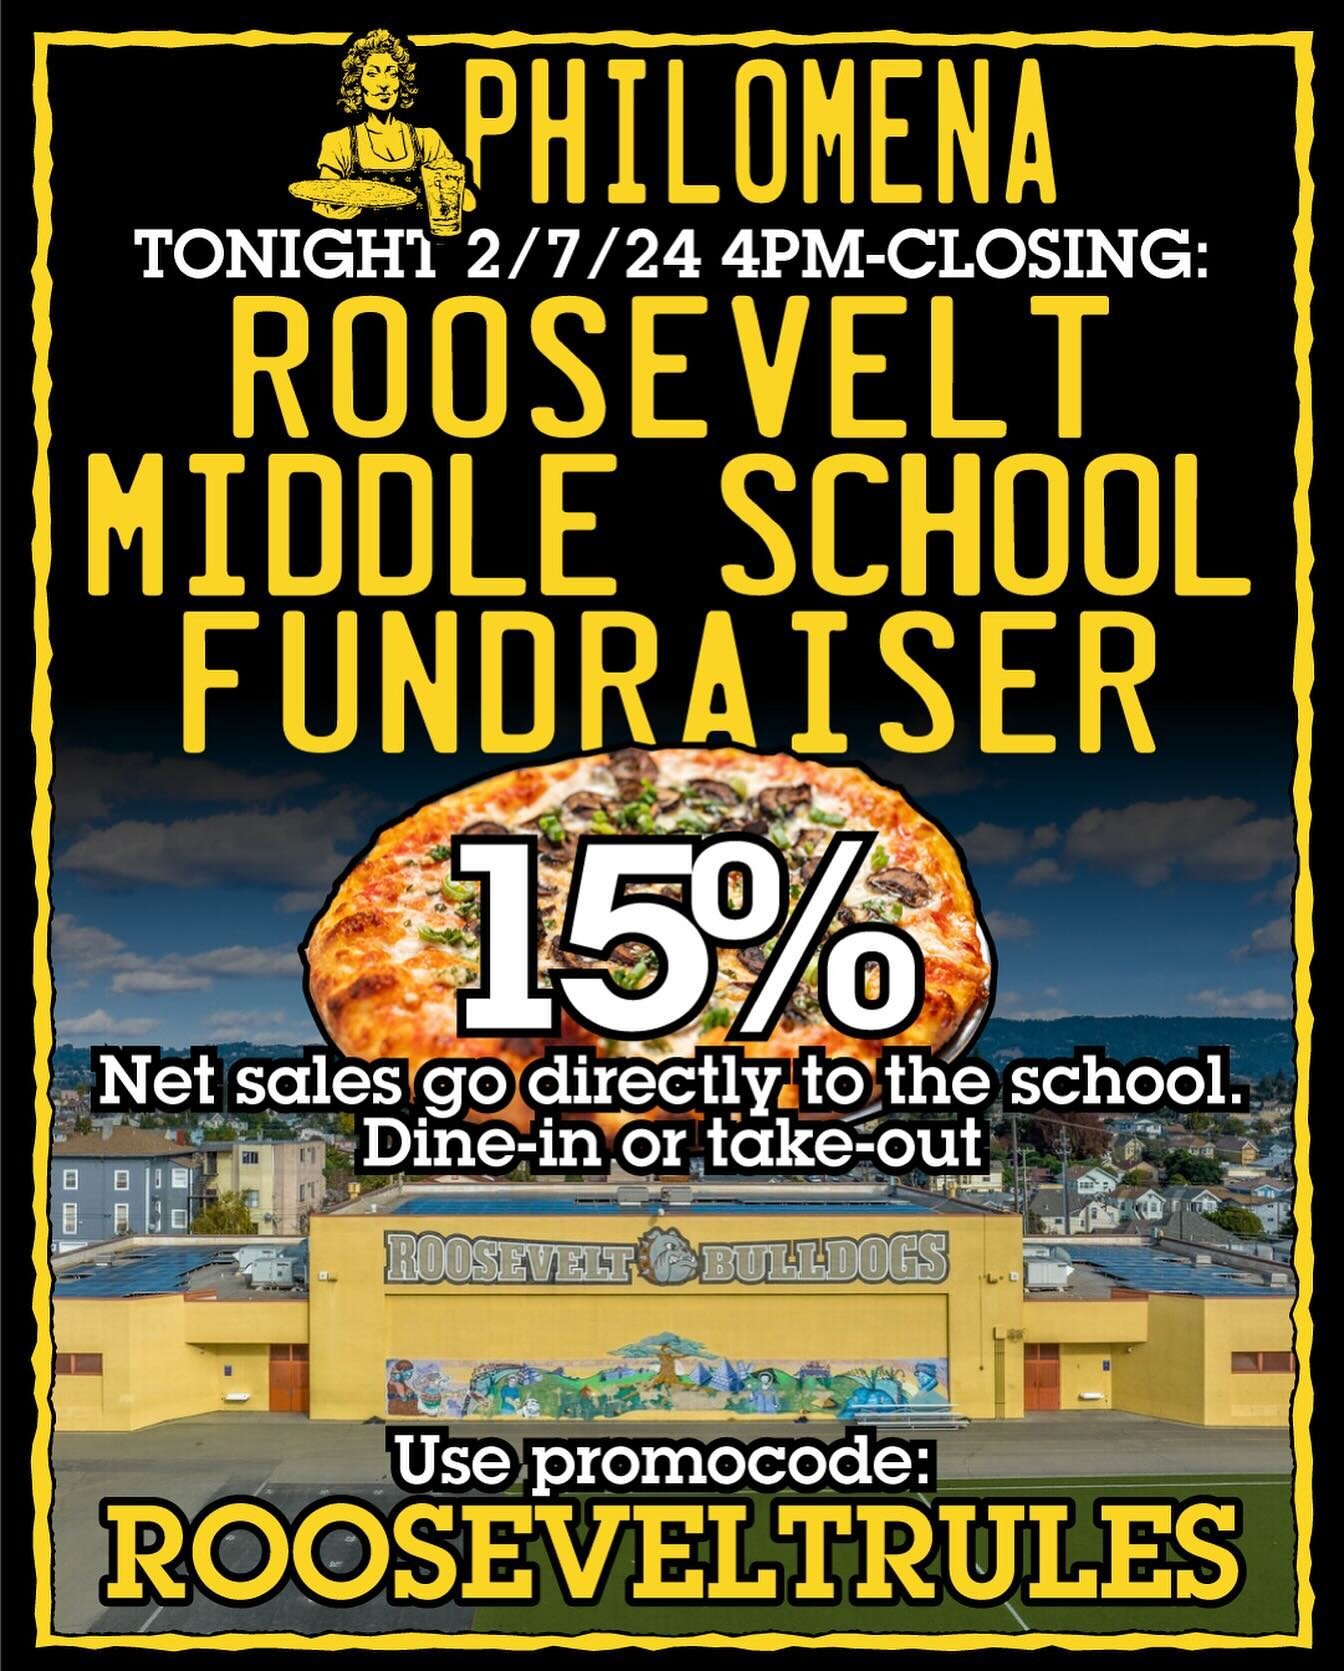 Come out tonight for Roosevelt Middle School! 15% of dine-in or take-out goes directly the school @rms_oak !
Use promocode: ROOSEVELTRULES